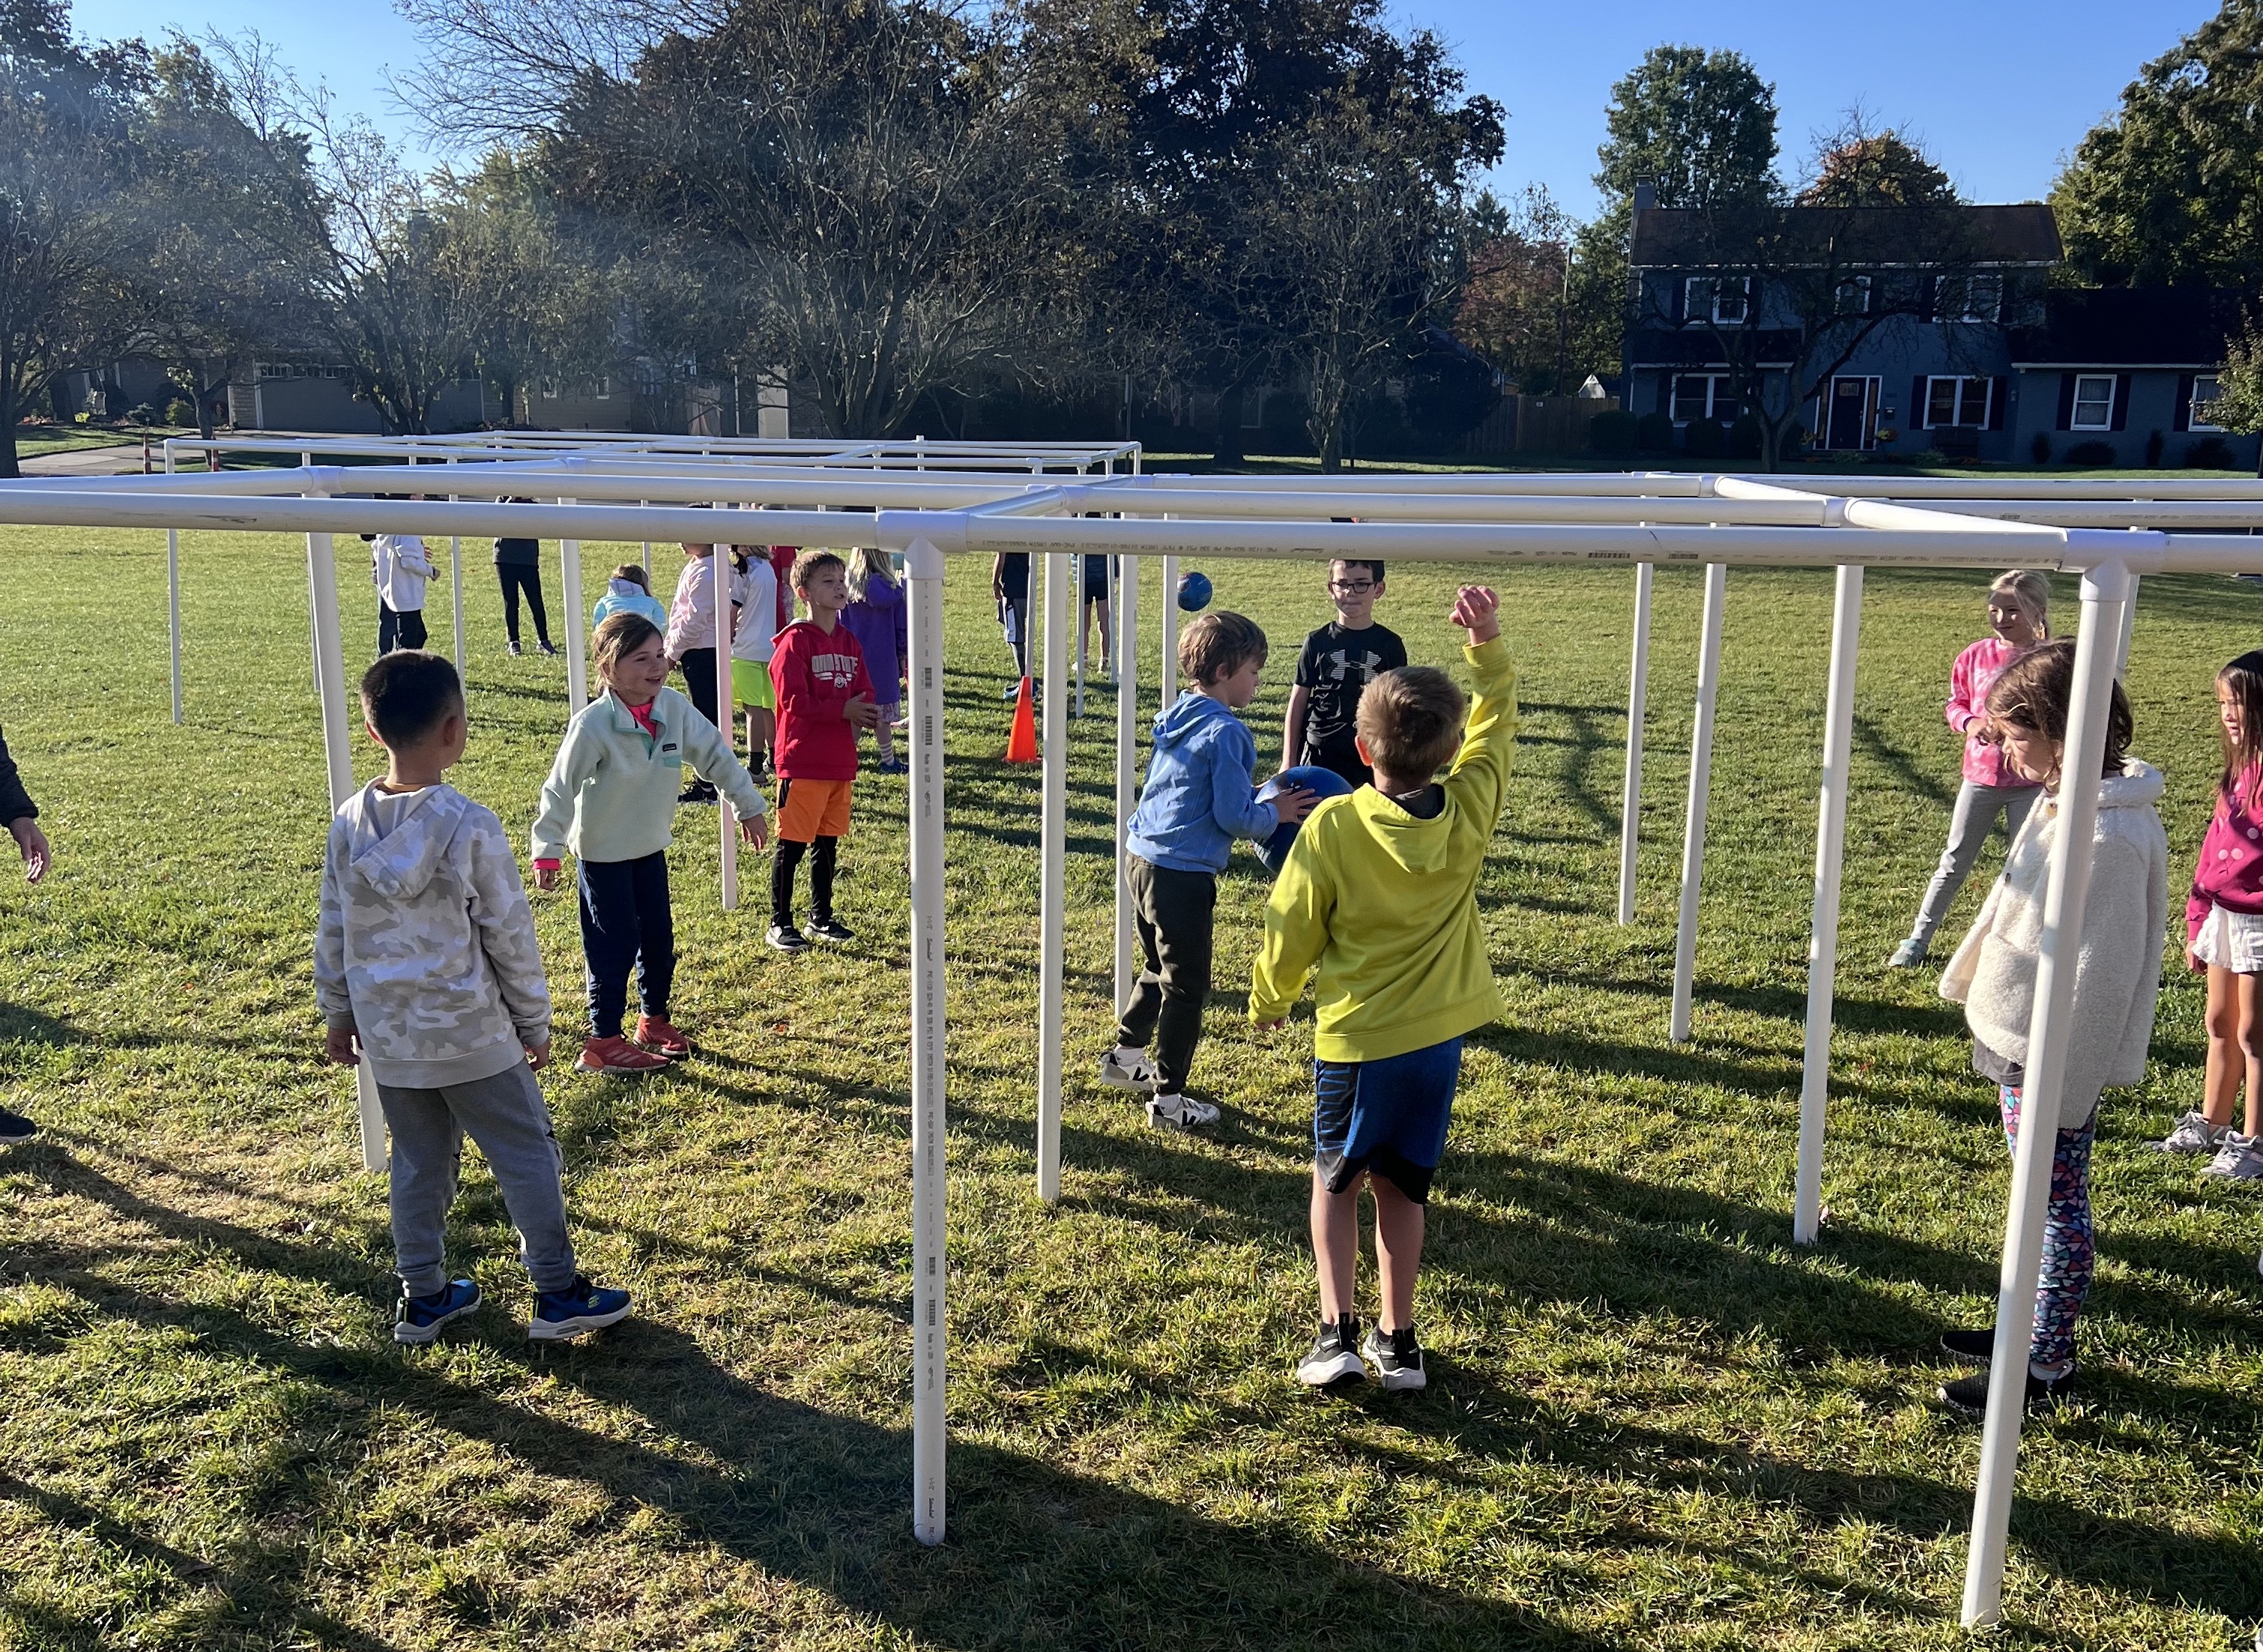 Students engaging in a 9-square activity involving a structure made of PVC pipes